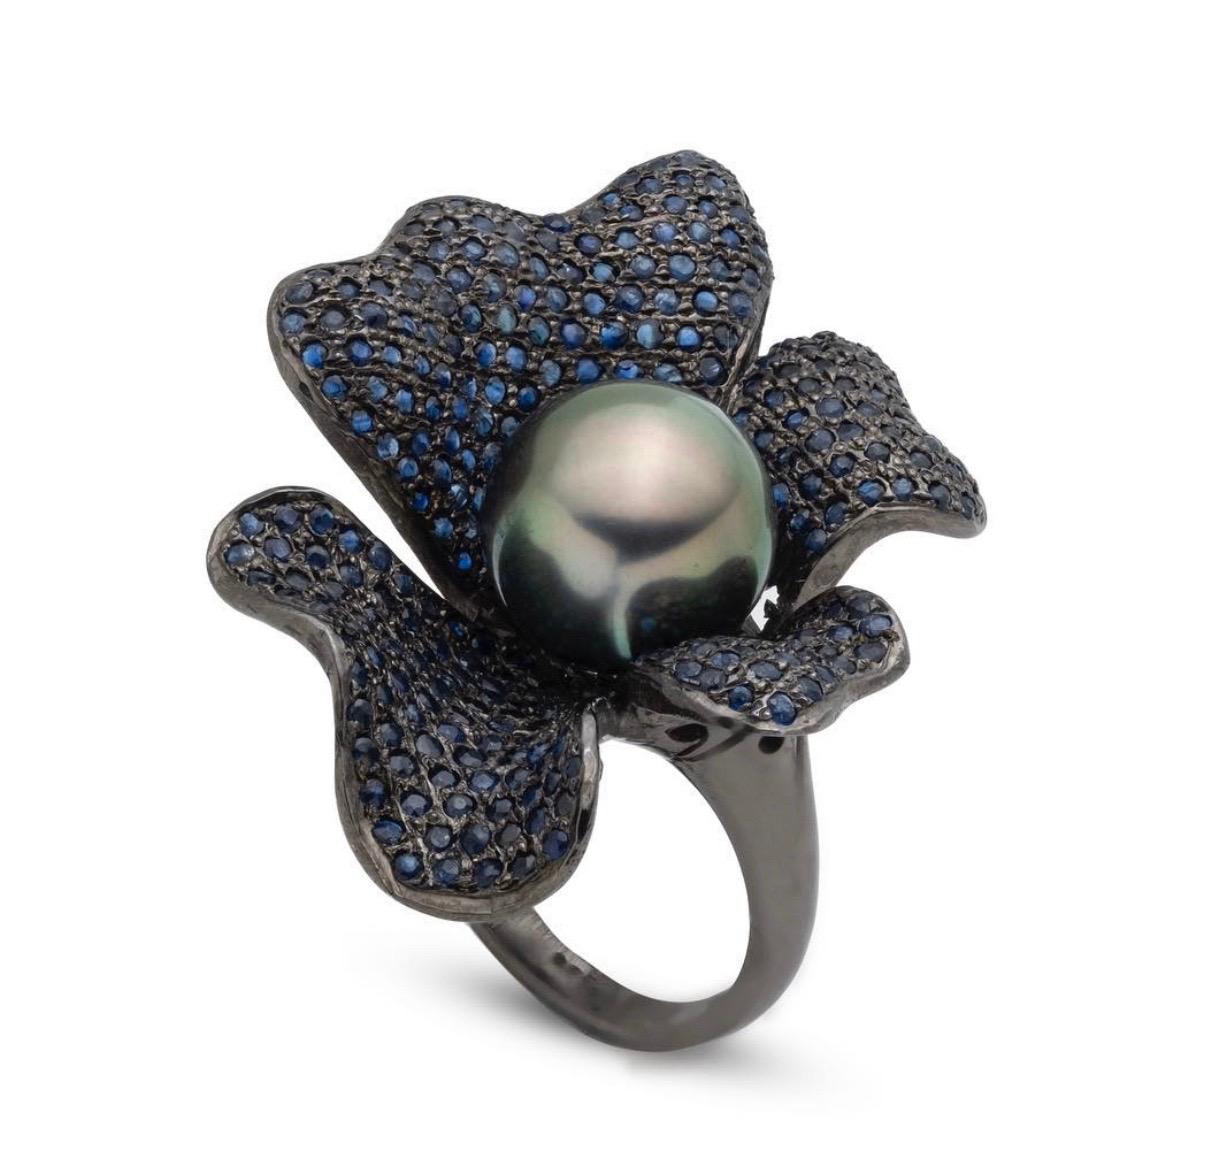 Jane Magon Collections Tahitian Pearl and Pave Blue Sapphire Ring set in Black Rhodium Sterling Silver. The Tahitian Pearl measures 11mm and is Fine Quality with a Green and Rose Overtone, no blemishes. The Sapphire weights are approximately 2.00ct